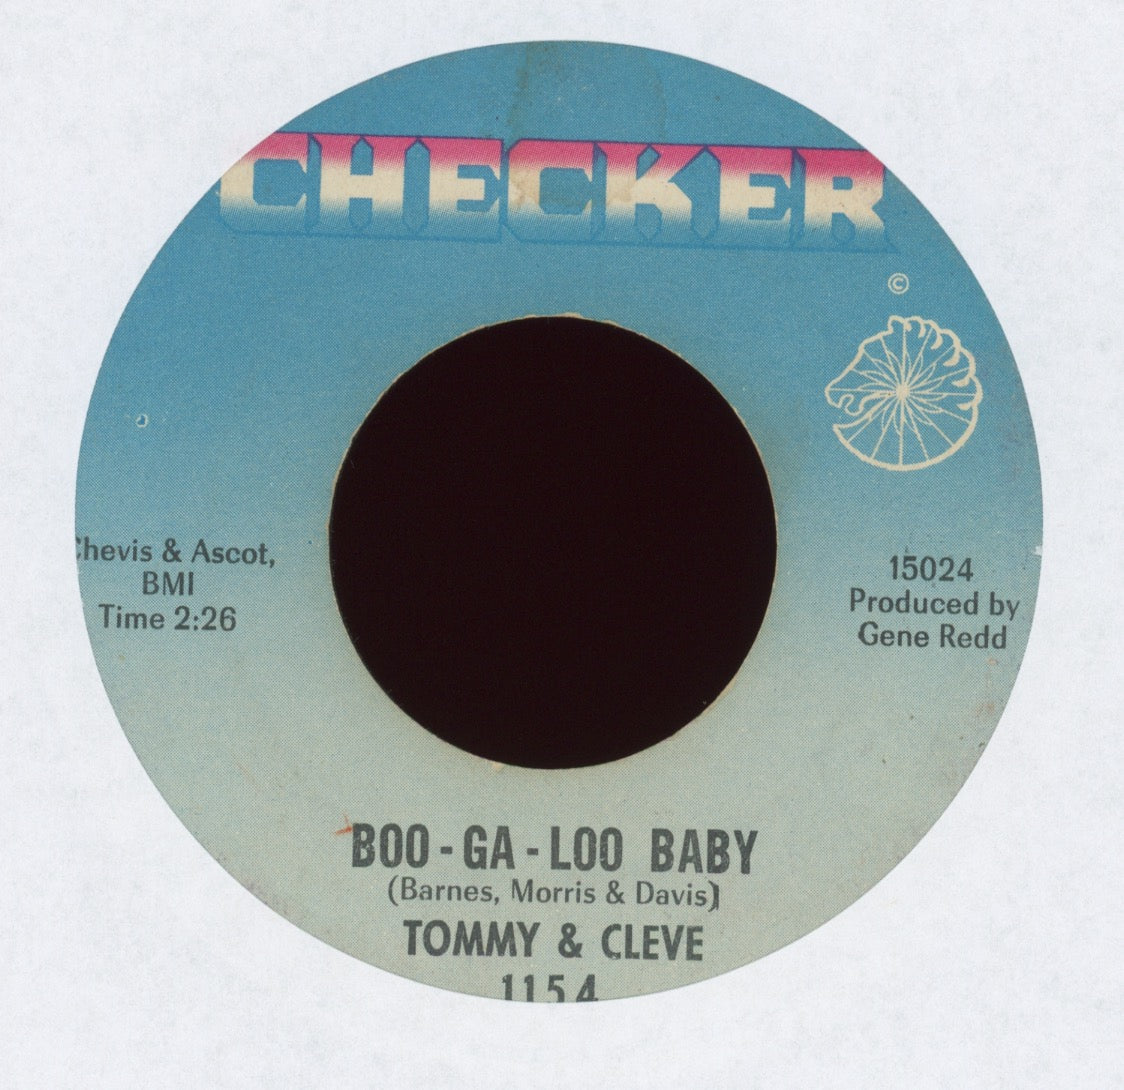 Tommy & Cleve - Boo-Ga-Loo Baby on Checker